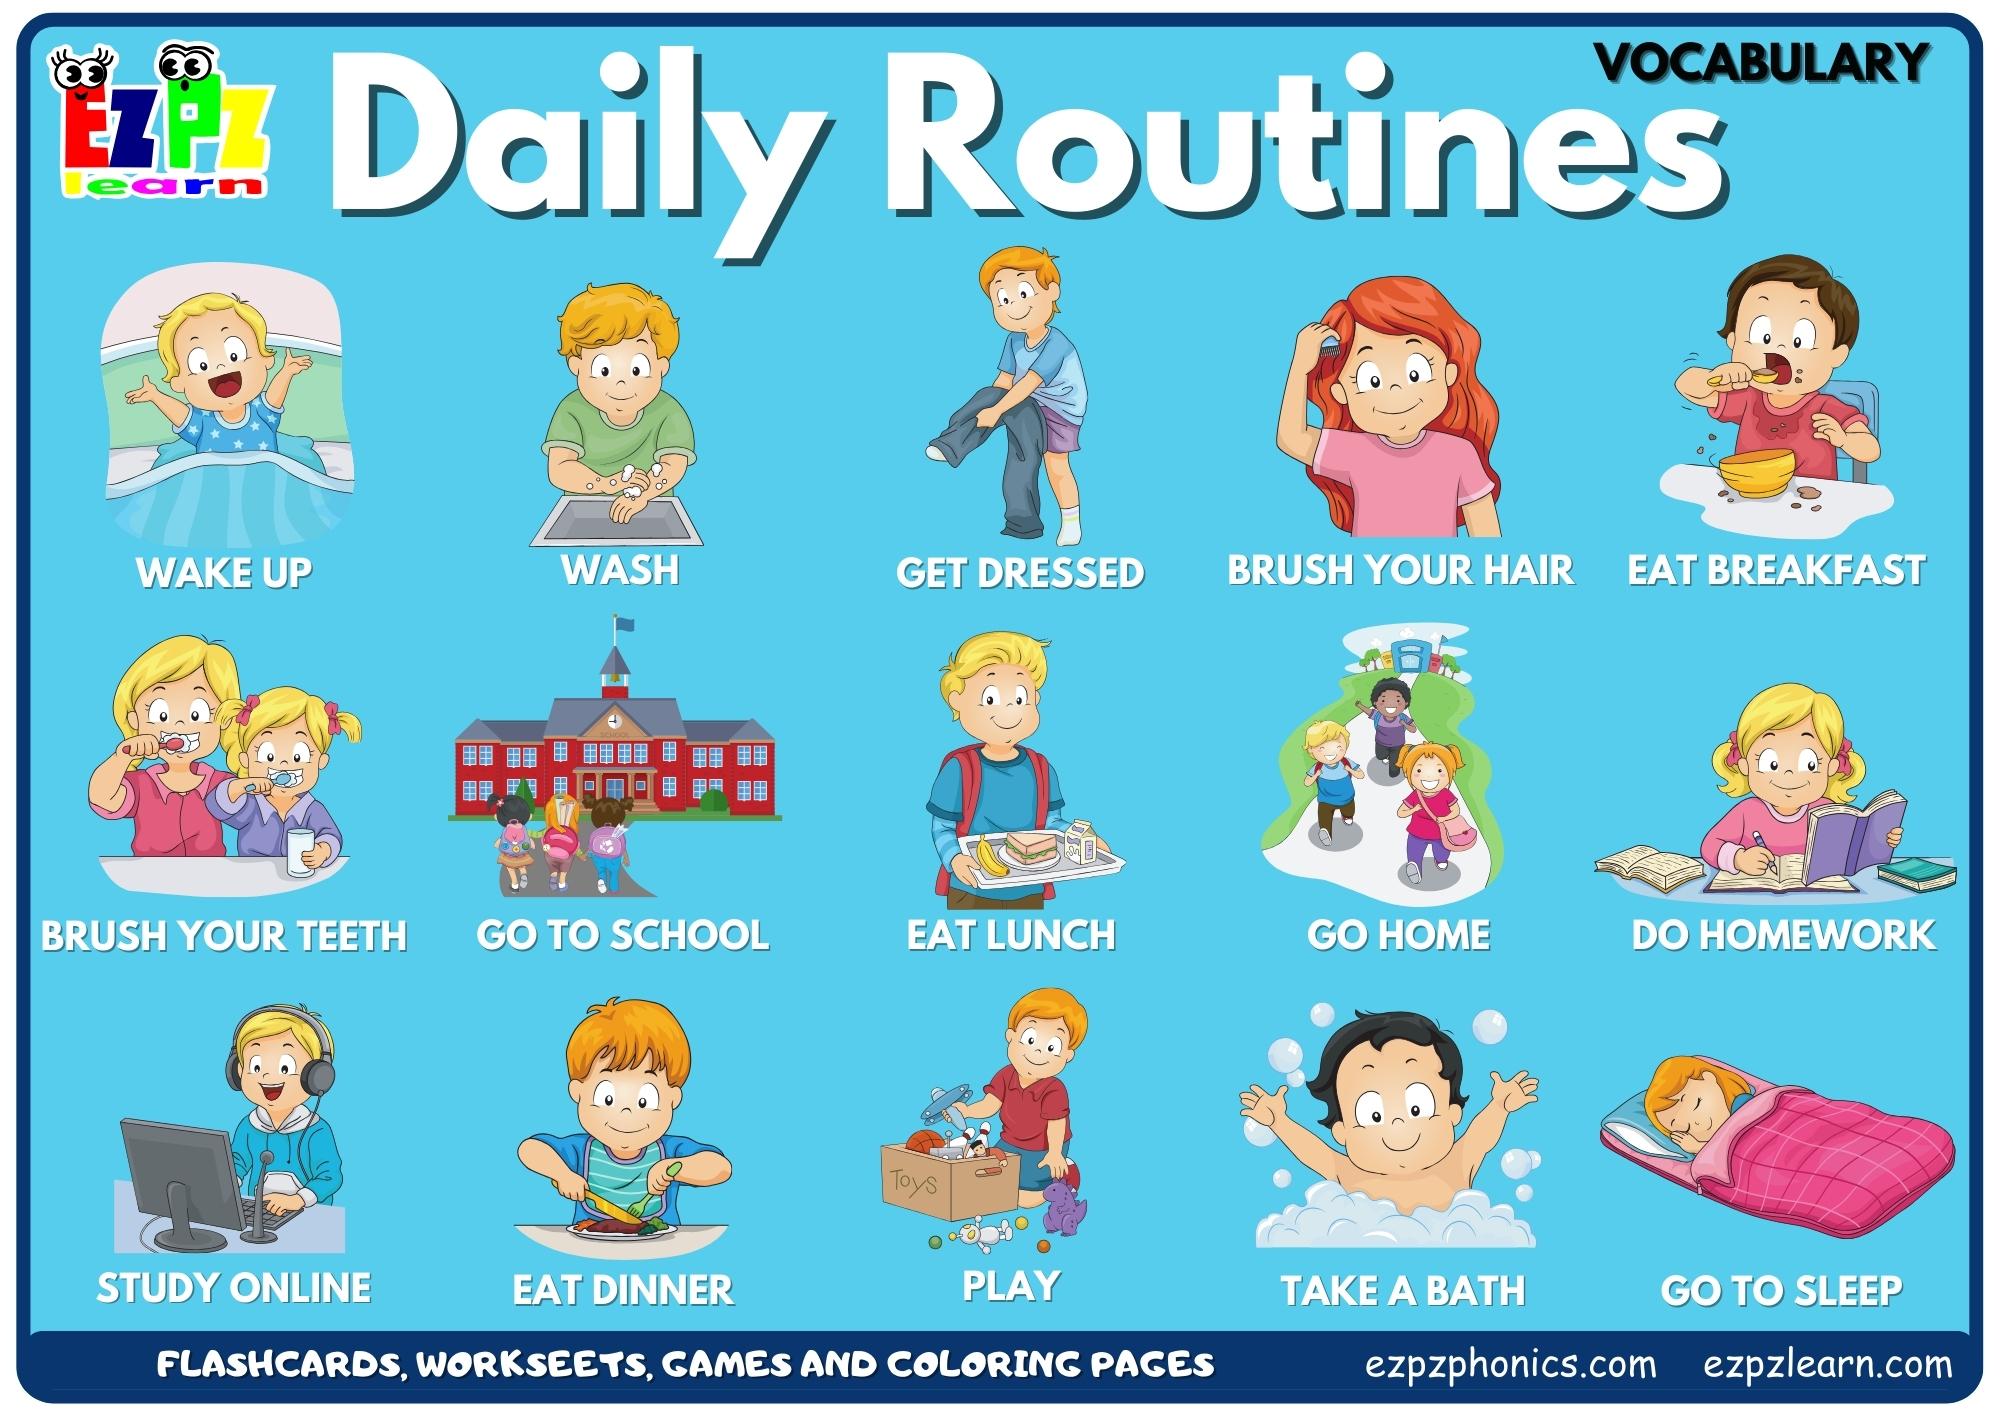 Daily Routine Word Match Game - Ezpzlearn.com  English vocabulary games,  Vocabulary games for kids, English lessons for kids